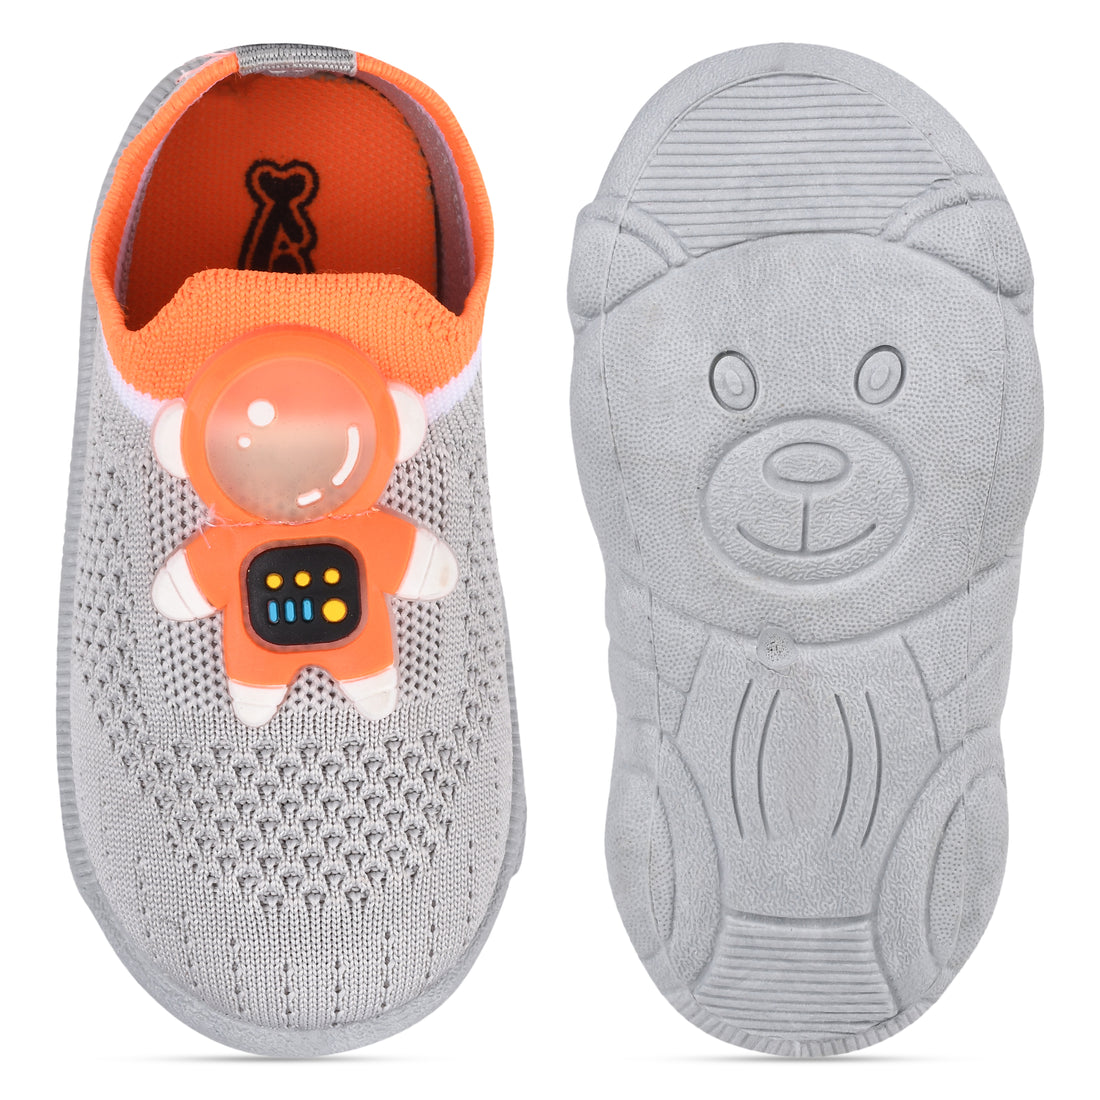 Kats FLYKIDS-20 Kids Unisex First Walking Slip on Trendy Casuals with Musical Chu-chu Sound Shoes (9 to 24 Months)